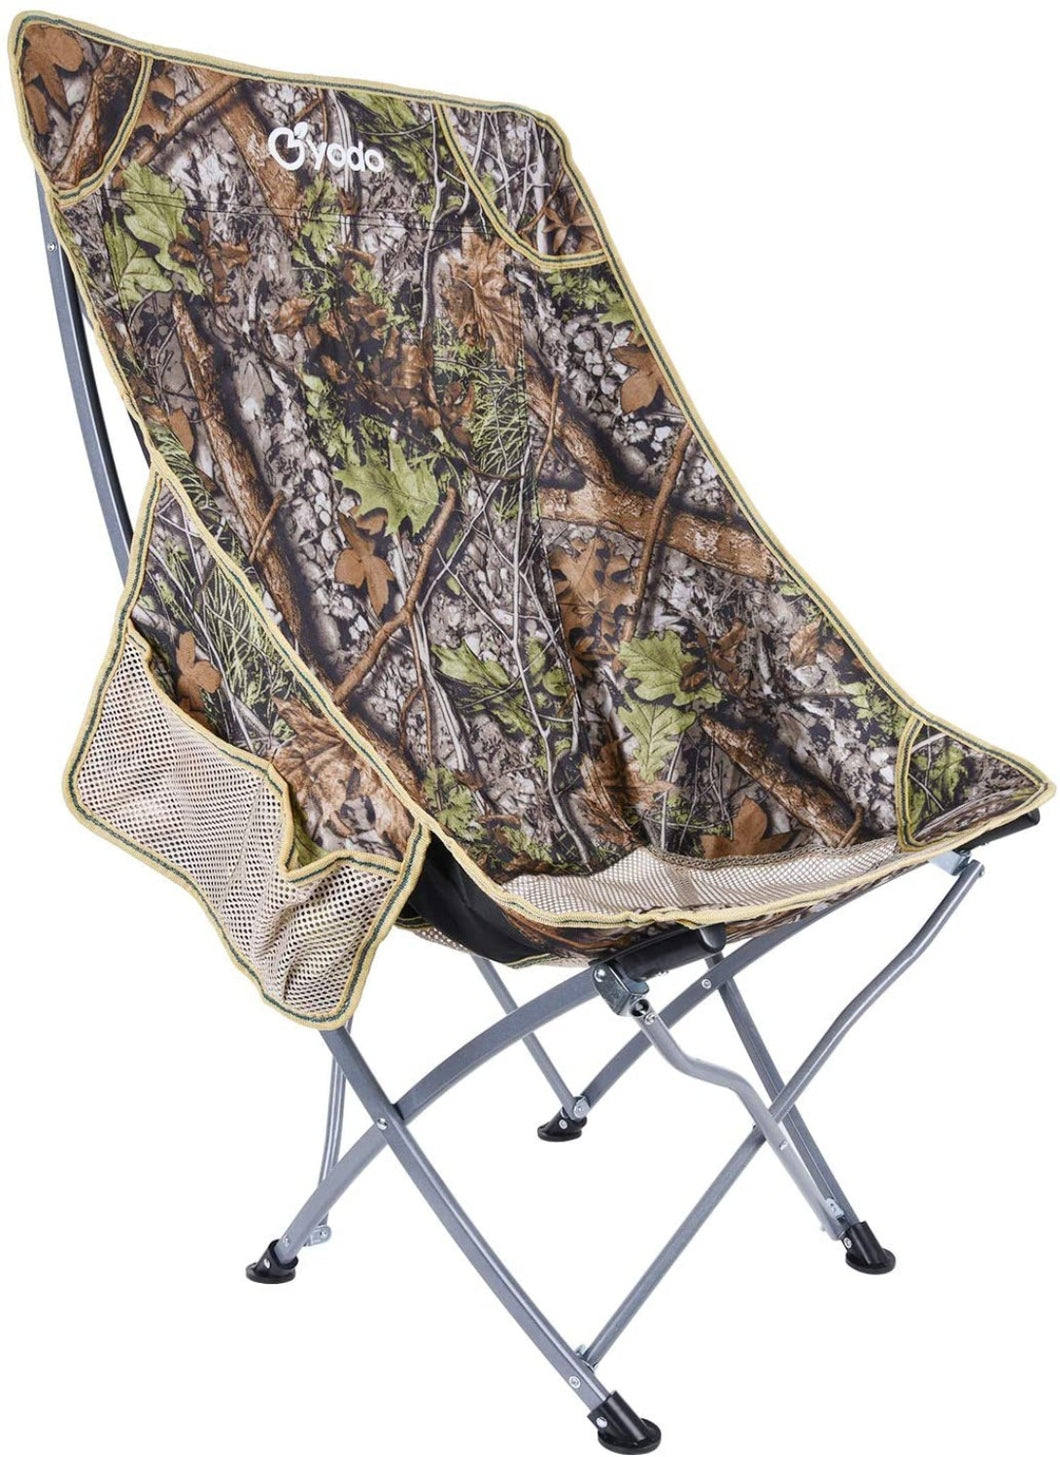 Outdoor Chair [1000D Fabric / Waterproof] Load Capacity 220.5 lbs (100 kg), Load Capacity 330.7 lbs (150 kg), Lightweight Aviation Material A7075 Aluminum Storage Bag Included